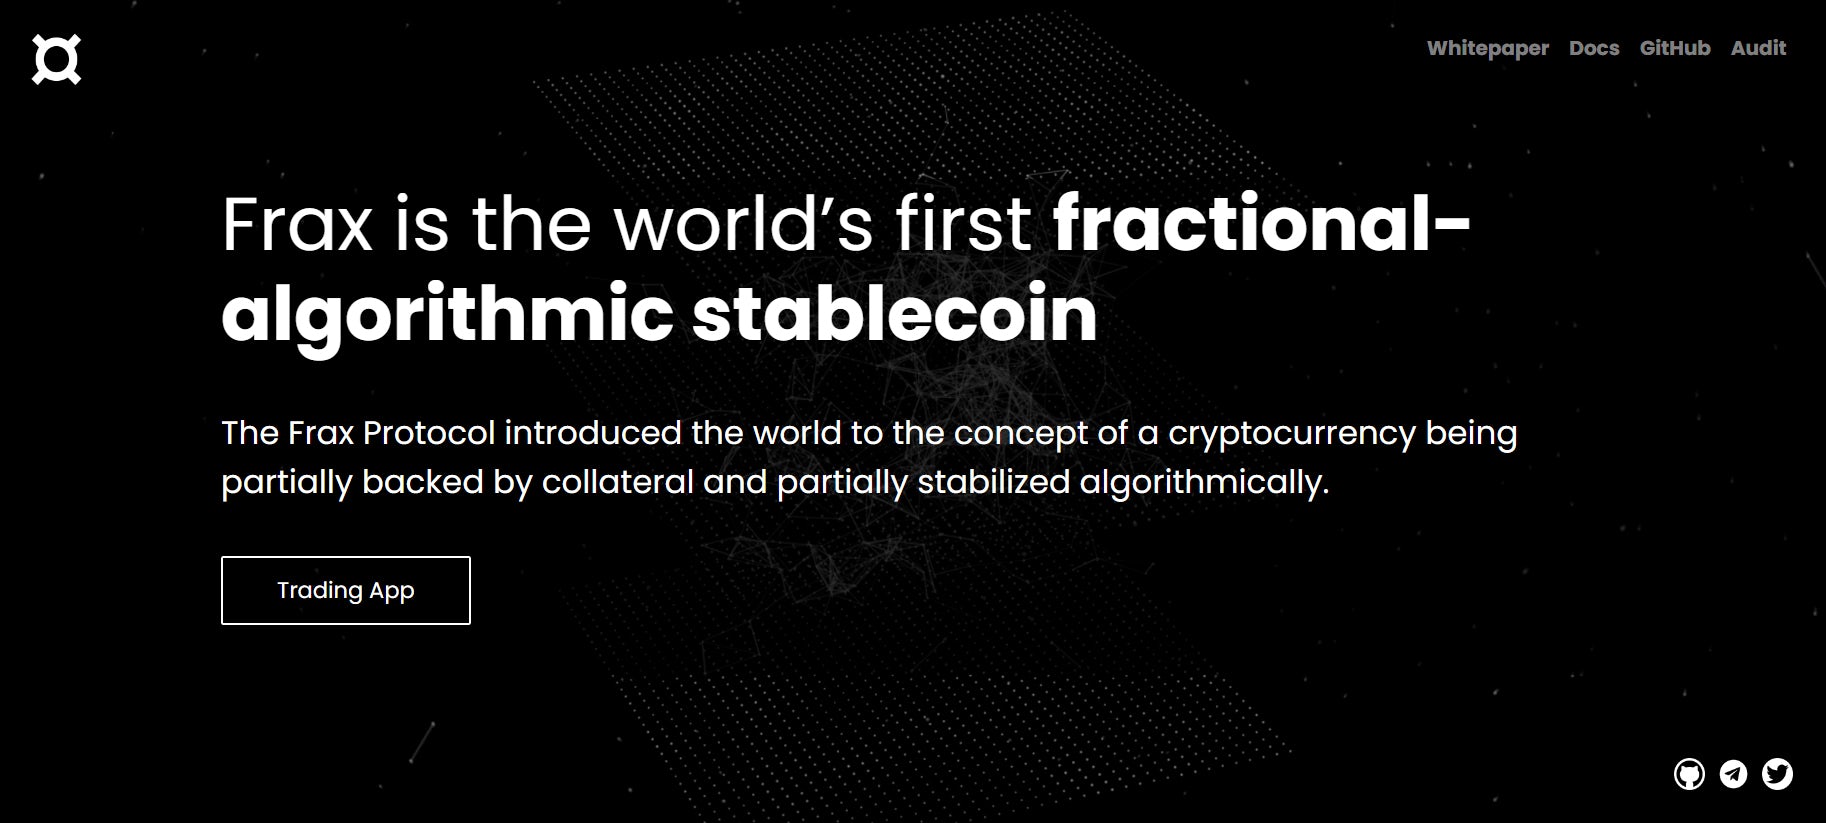 As Frax Finance’s website clearly states, FRAX is partially backed bycollateral and partially stabilised algorithmically.